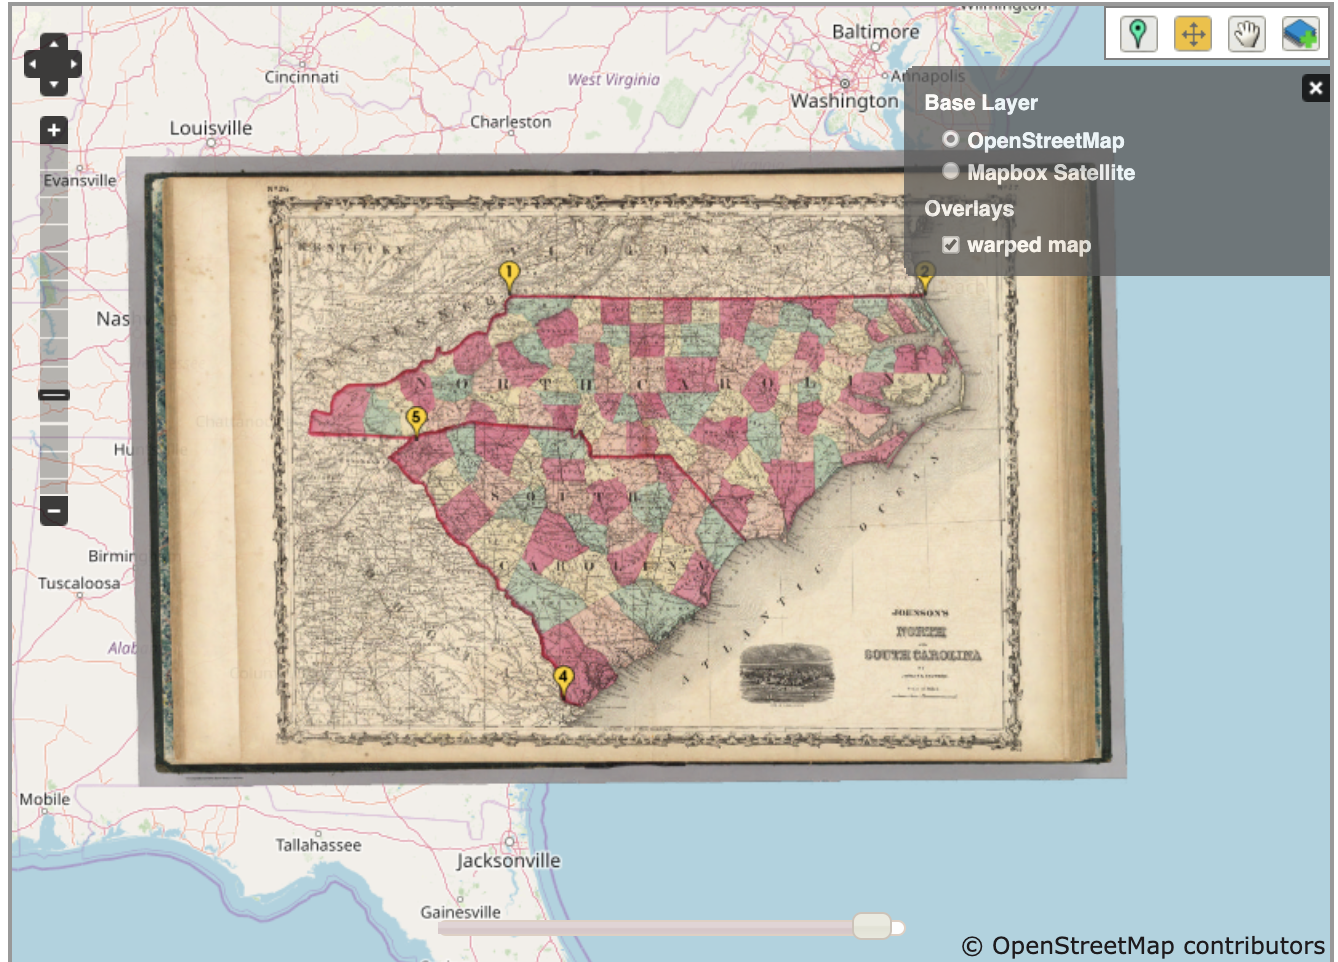 Screenshot of Map Warper's interface, with the scanned historical map of North Carolina and South Carolina overlaid onto a contemporary 'base layer' map of the same geographical region, at the same scale. At the upper left, there is a four-way navigation tool, and a slider-style zoom tool. At the upper right, there are icons including a marker point, a hand, and a four-way navigation arrow. A semi-opaque, information panel at upper right indicates that the base layer originates from OpenStreetMap and the overlay is a warped map.